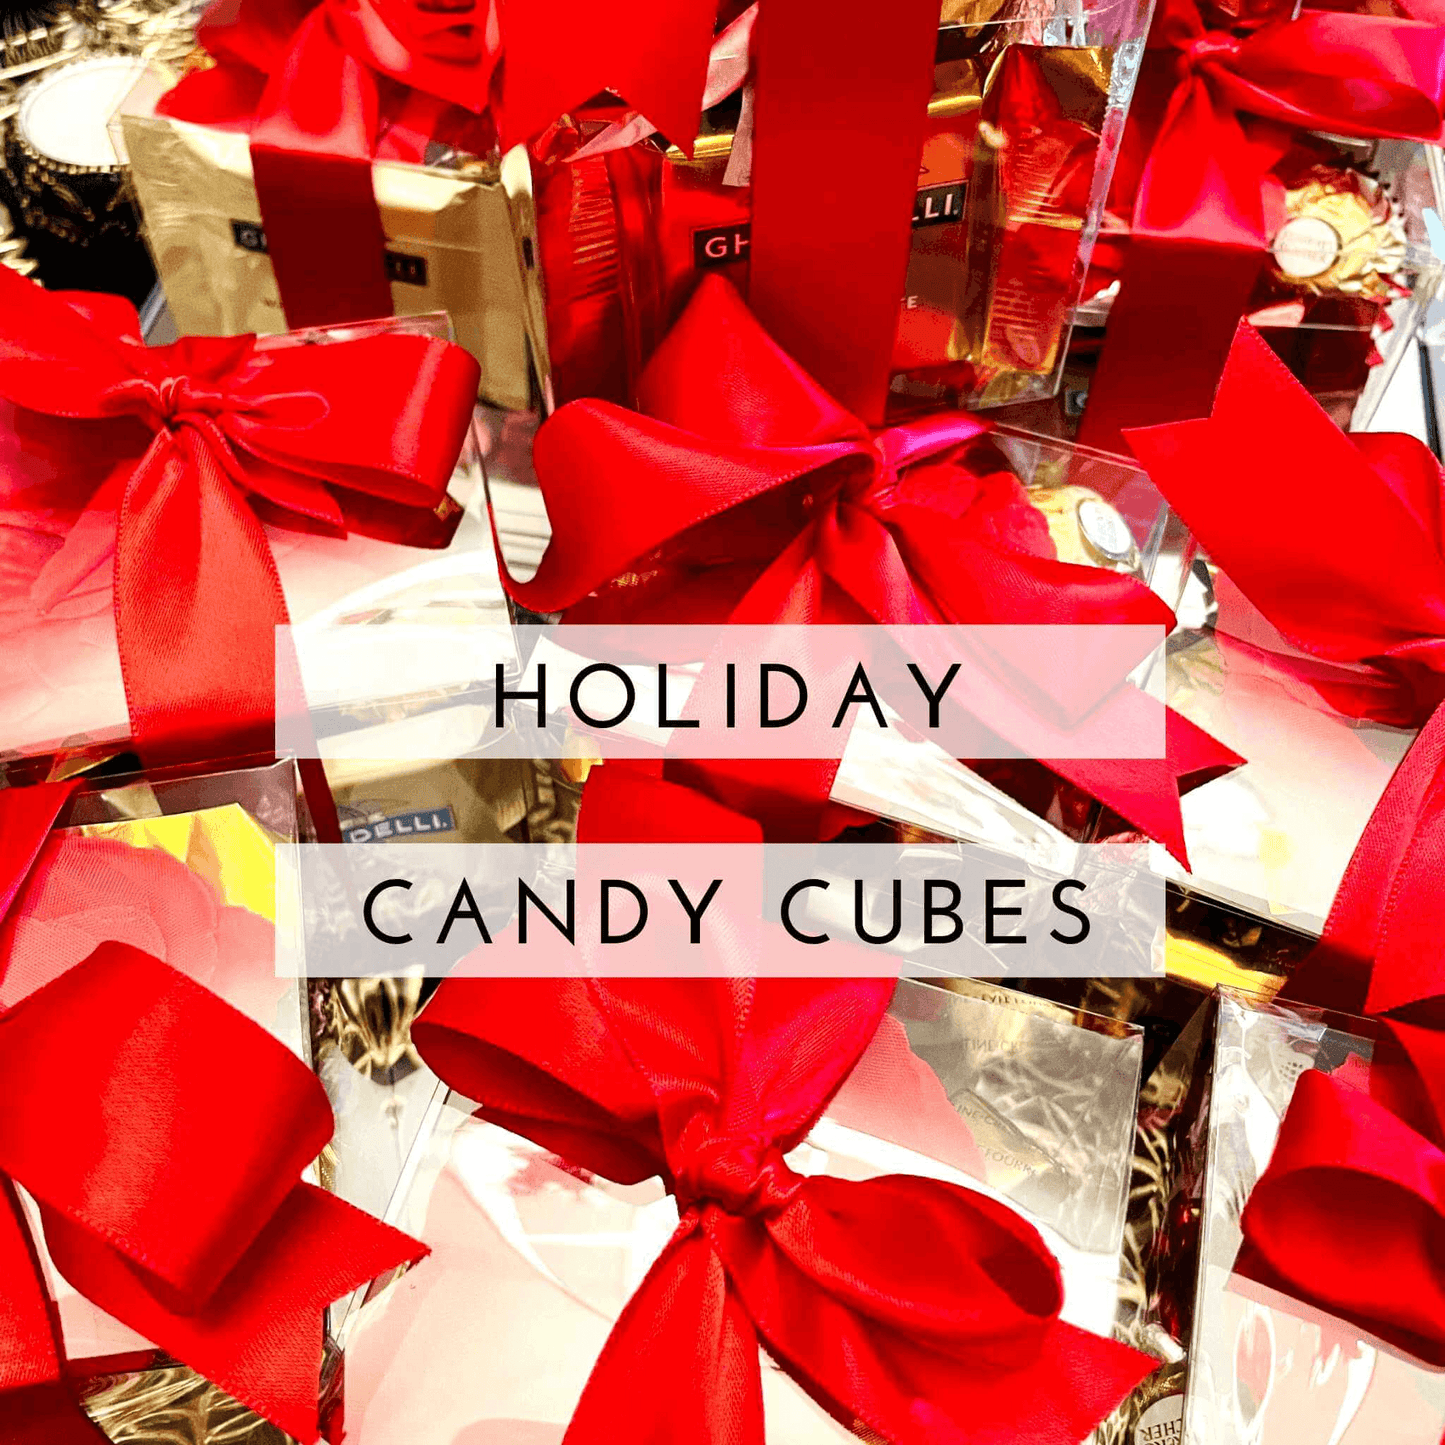 Festive red gift boxes with holiday candy cubes